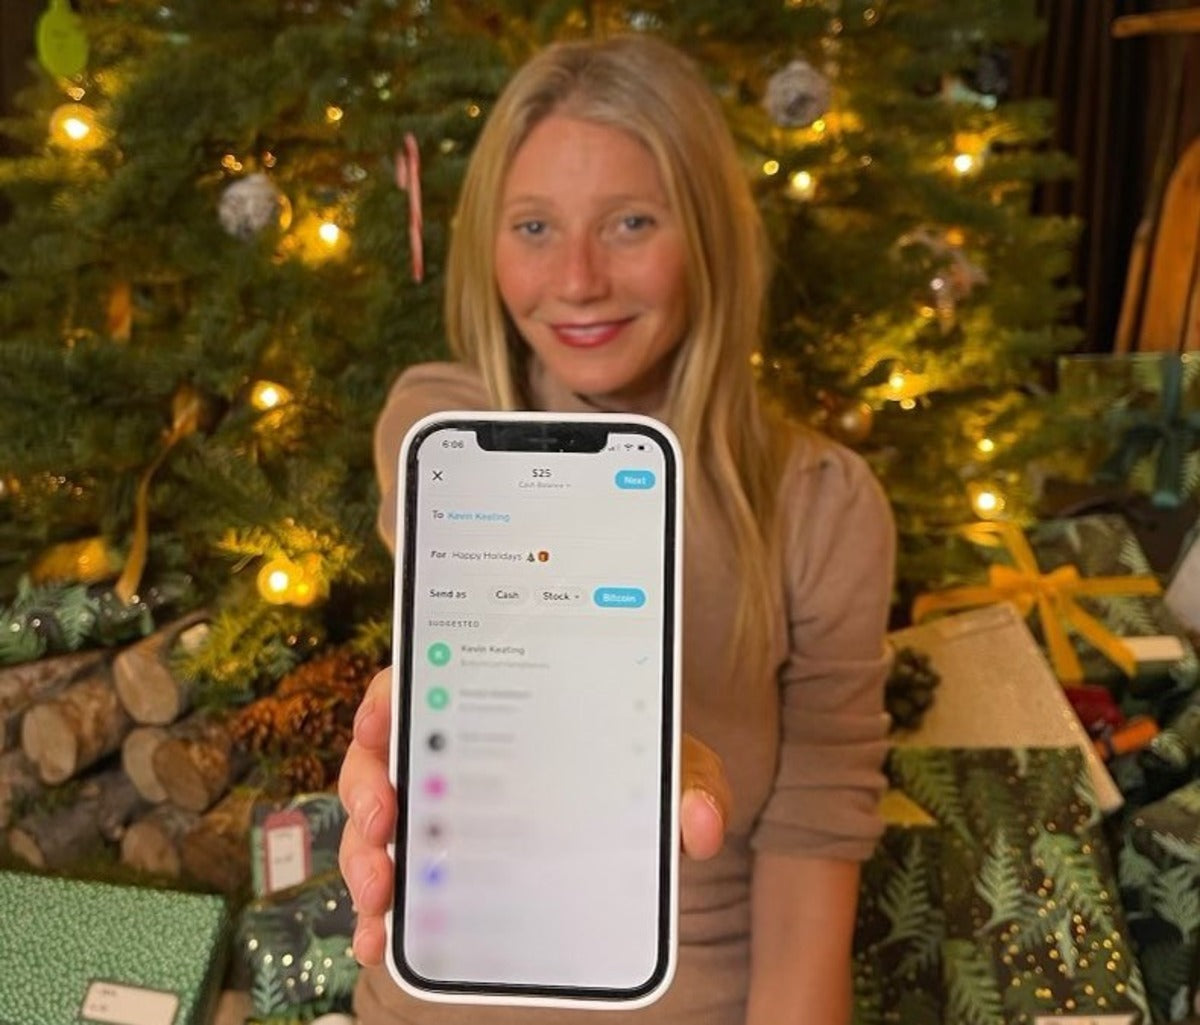 Gwyneth Paltrow Partners with Block's Cash App, Announces $500,000 Bitcoin Giveaway